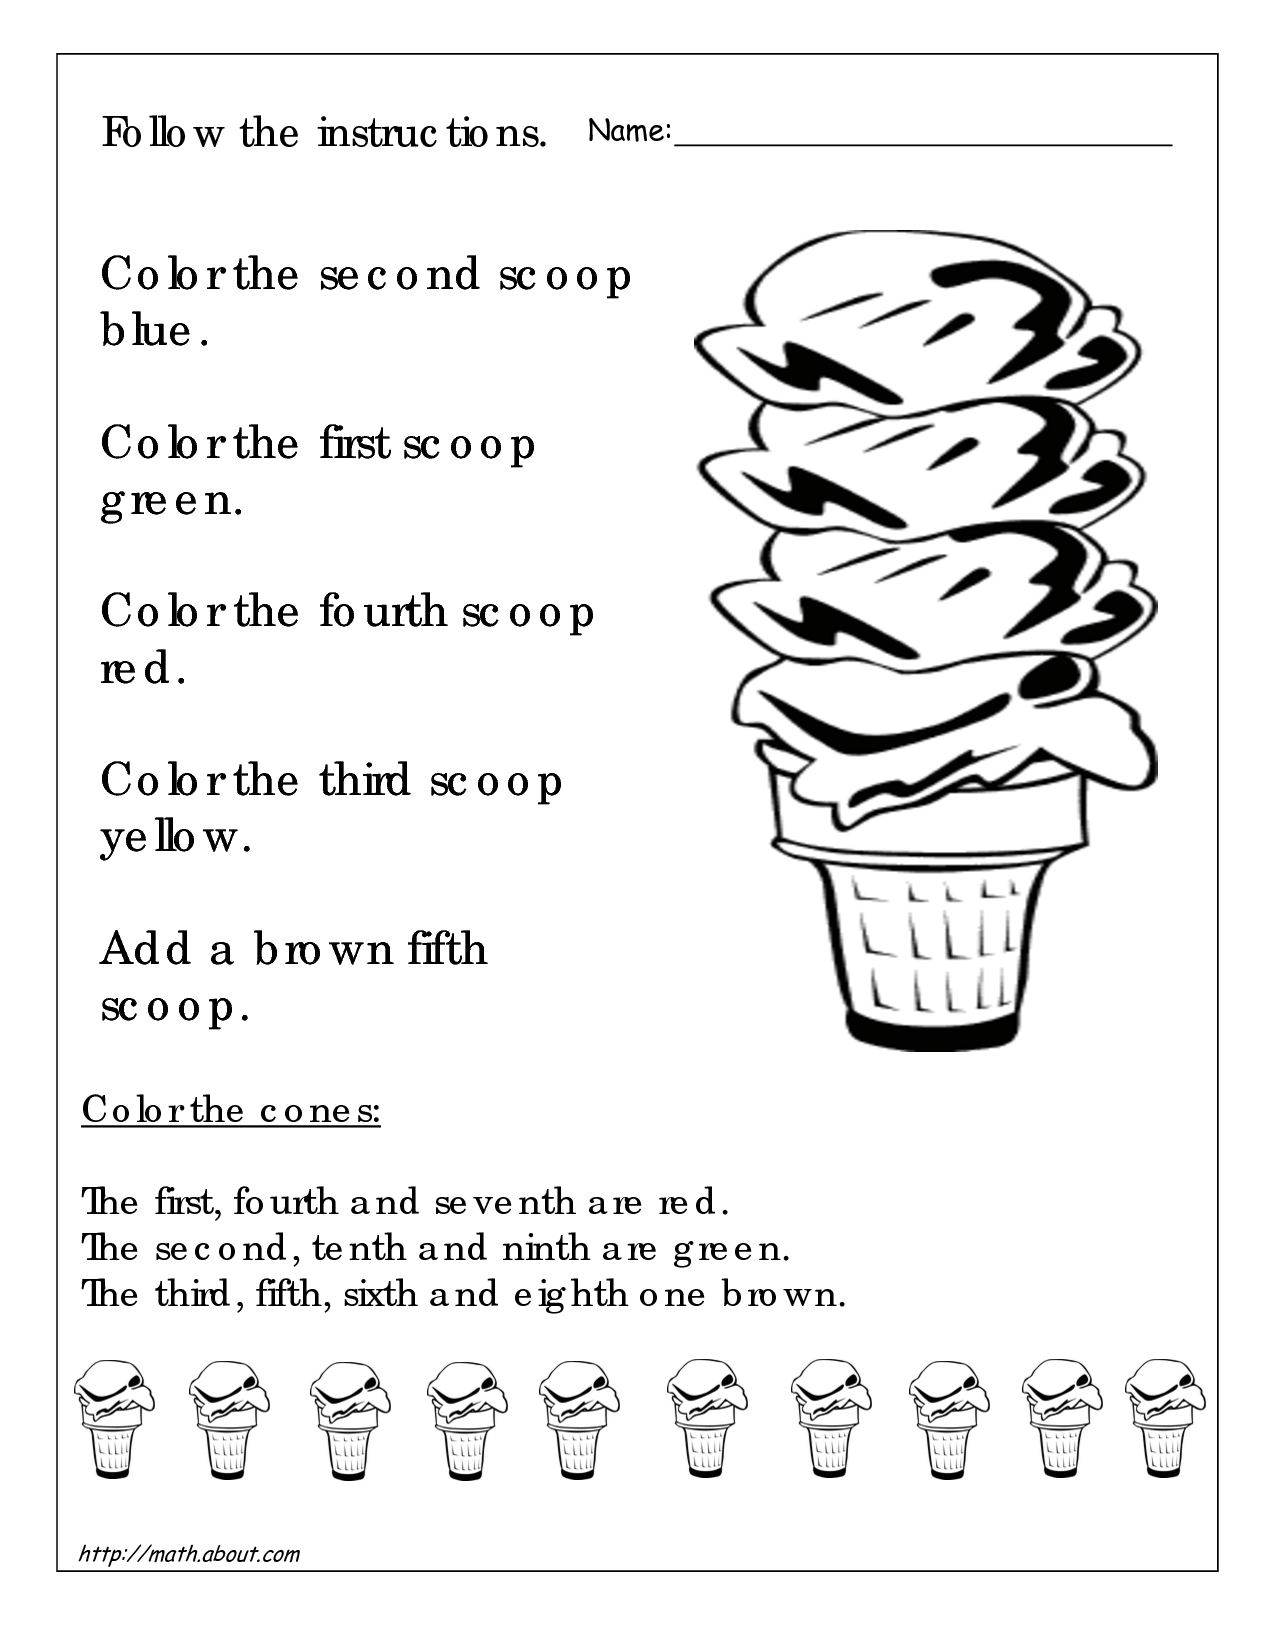 13 Images of Christmas Worksheets 3rd Grade